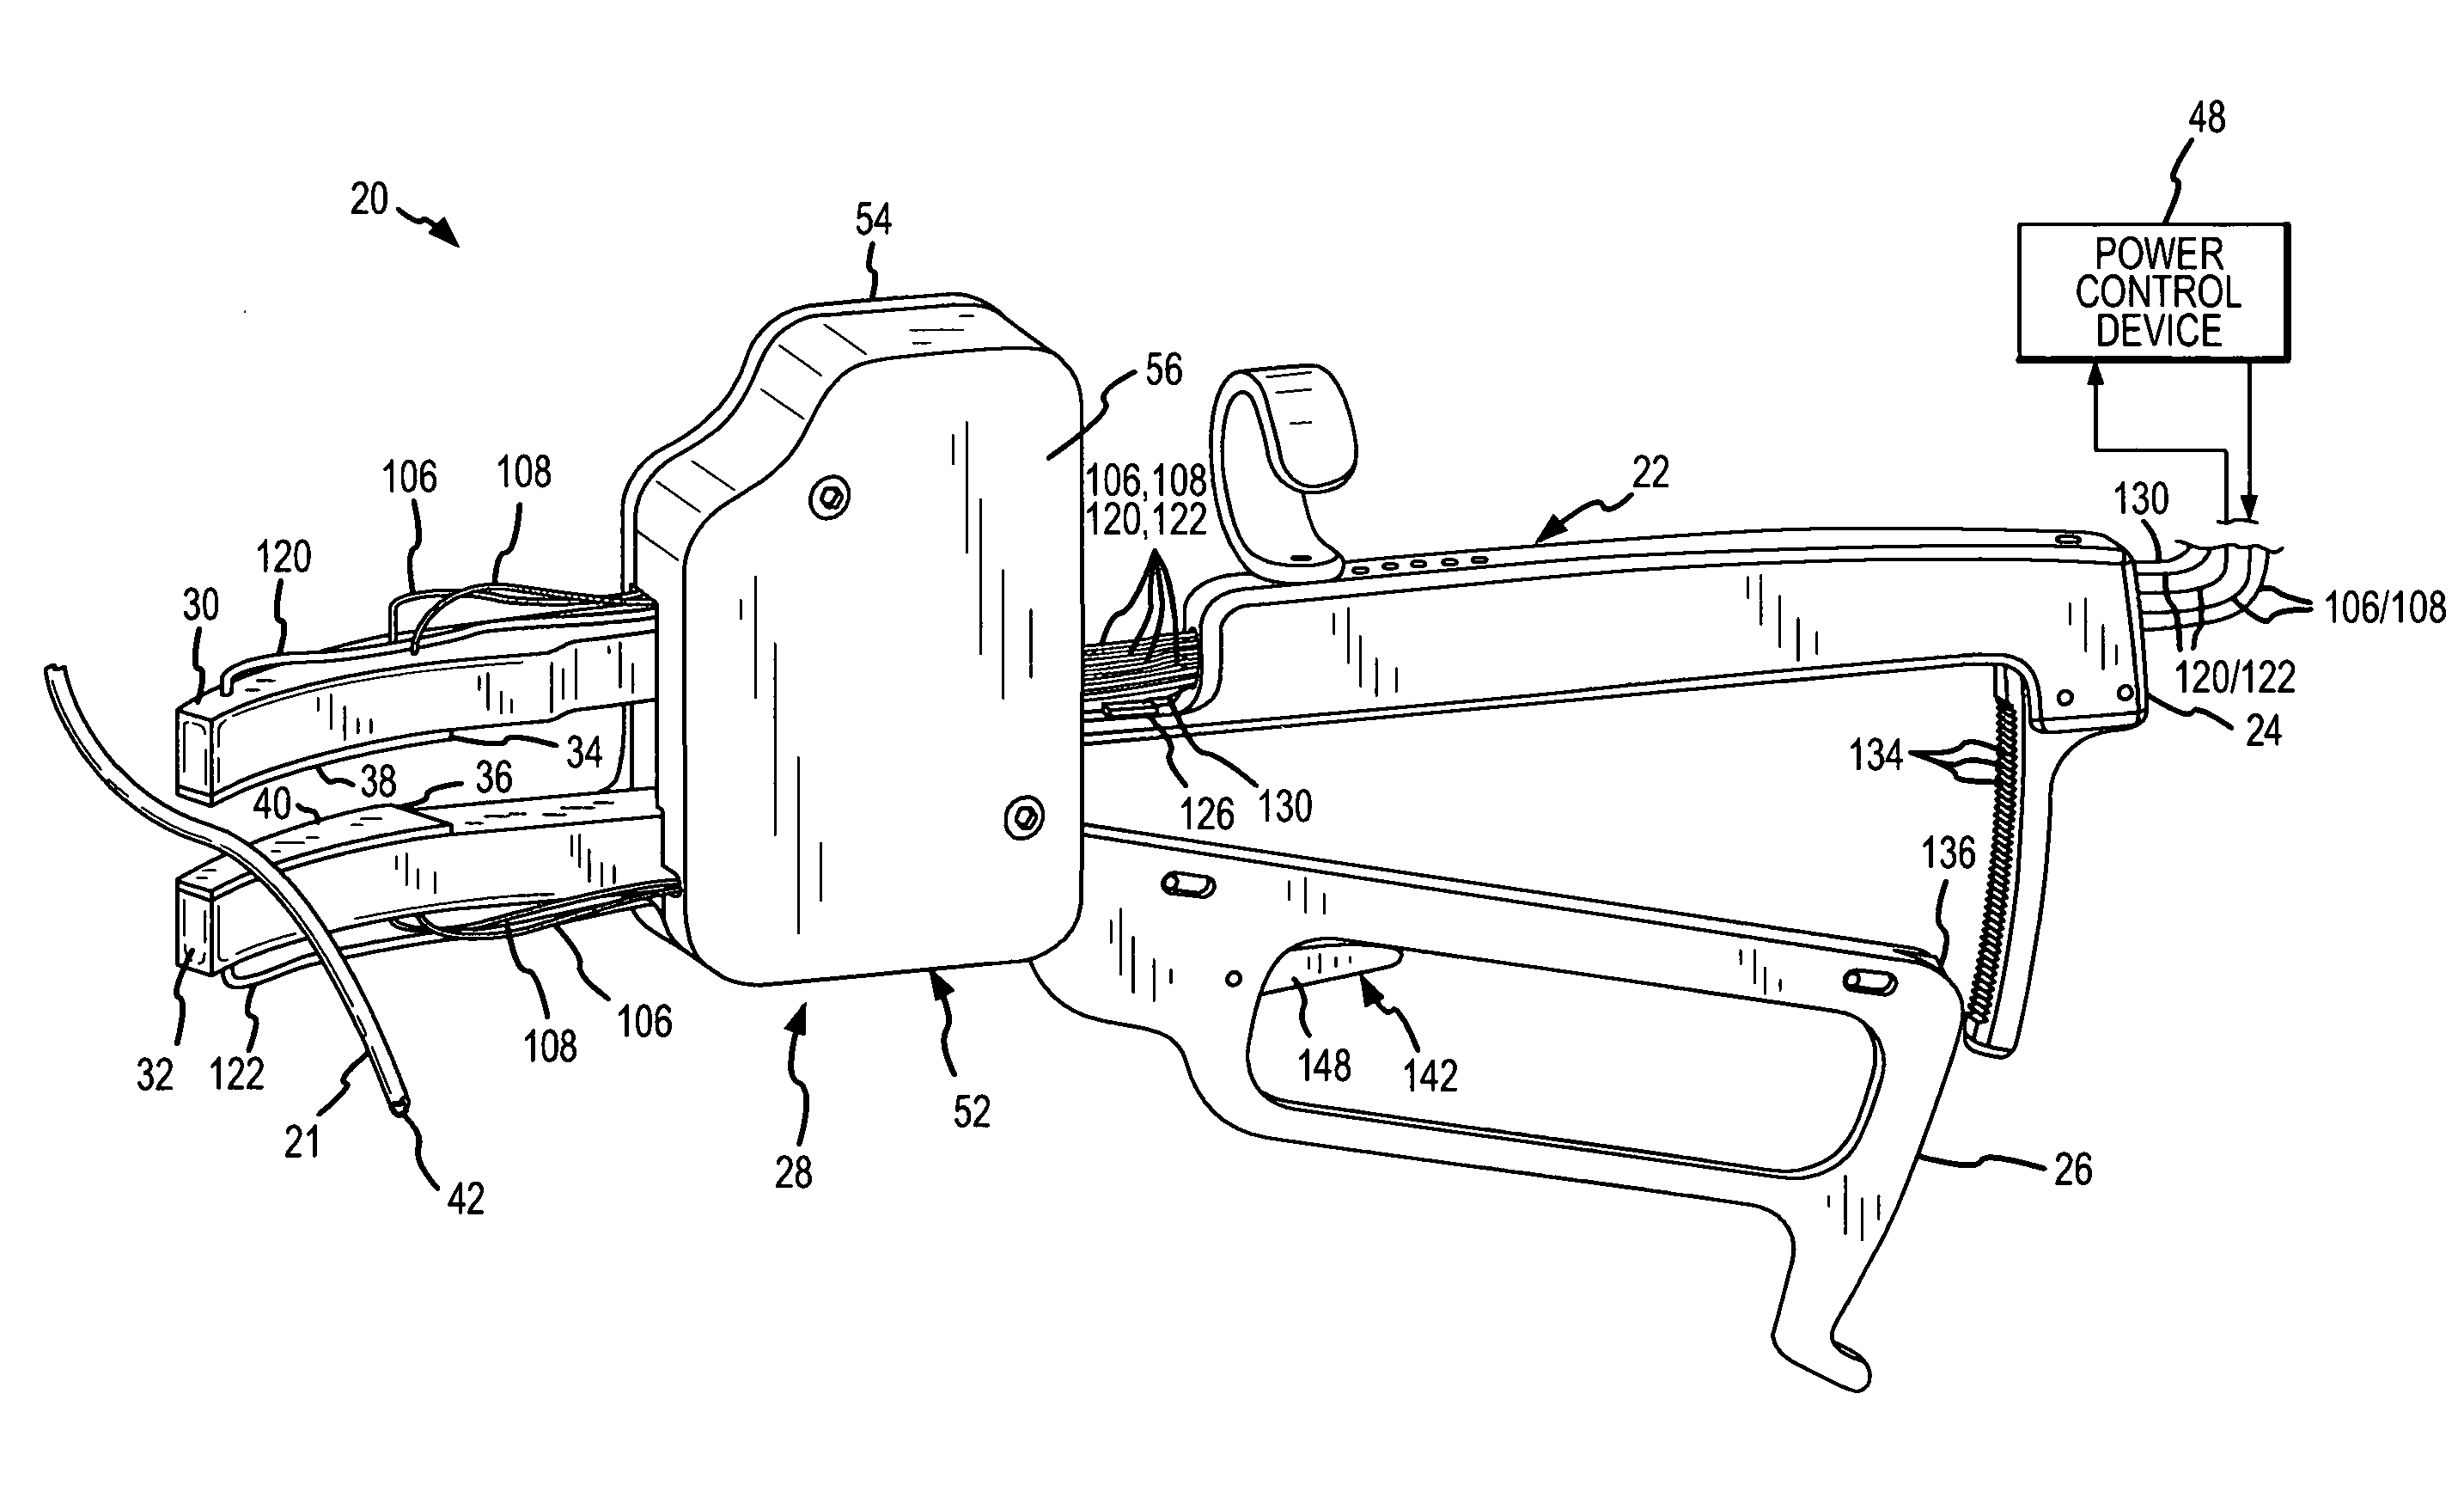 Apparatus and method for rapid reliable electrothermal tissue fusion and simultaneous cutting